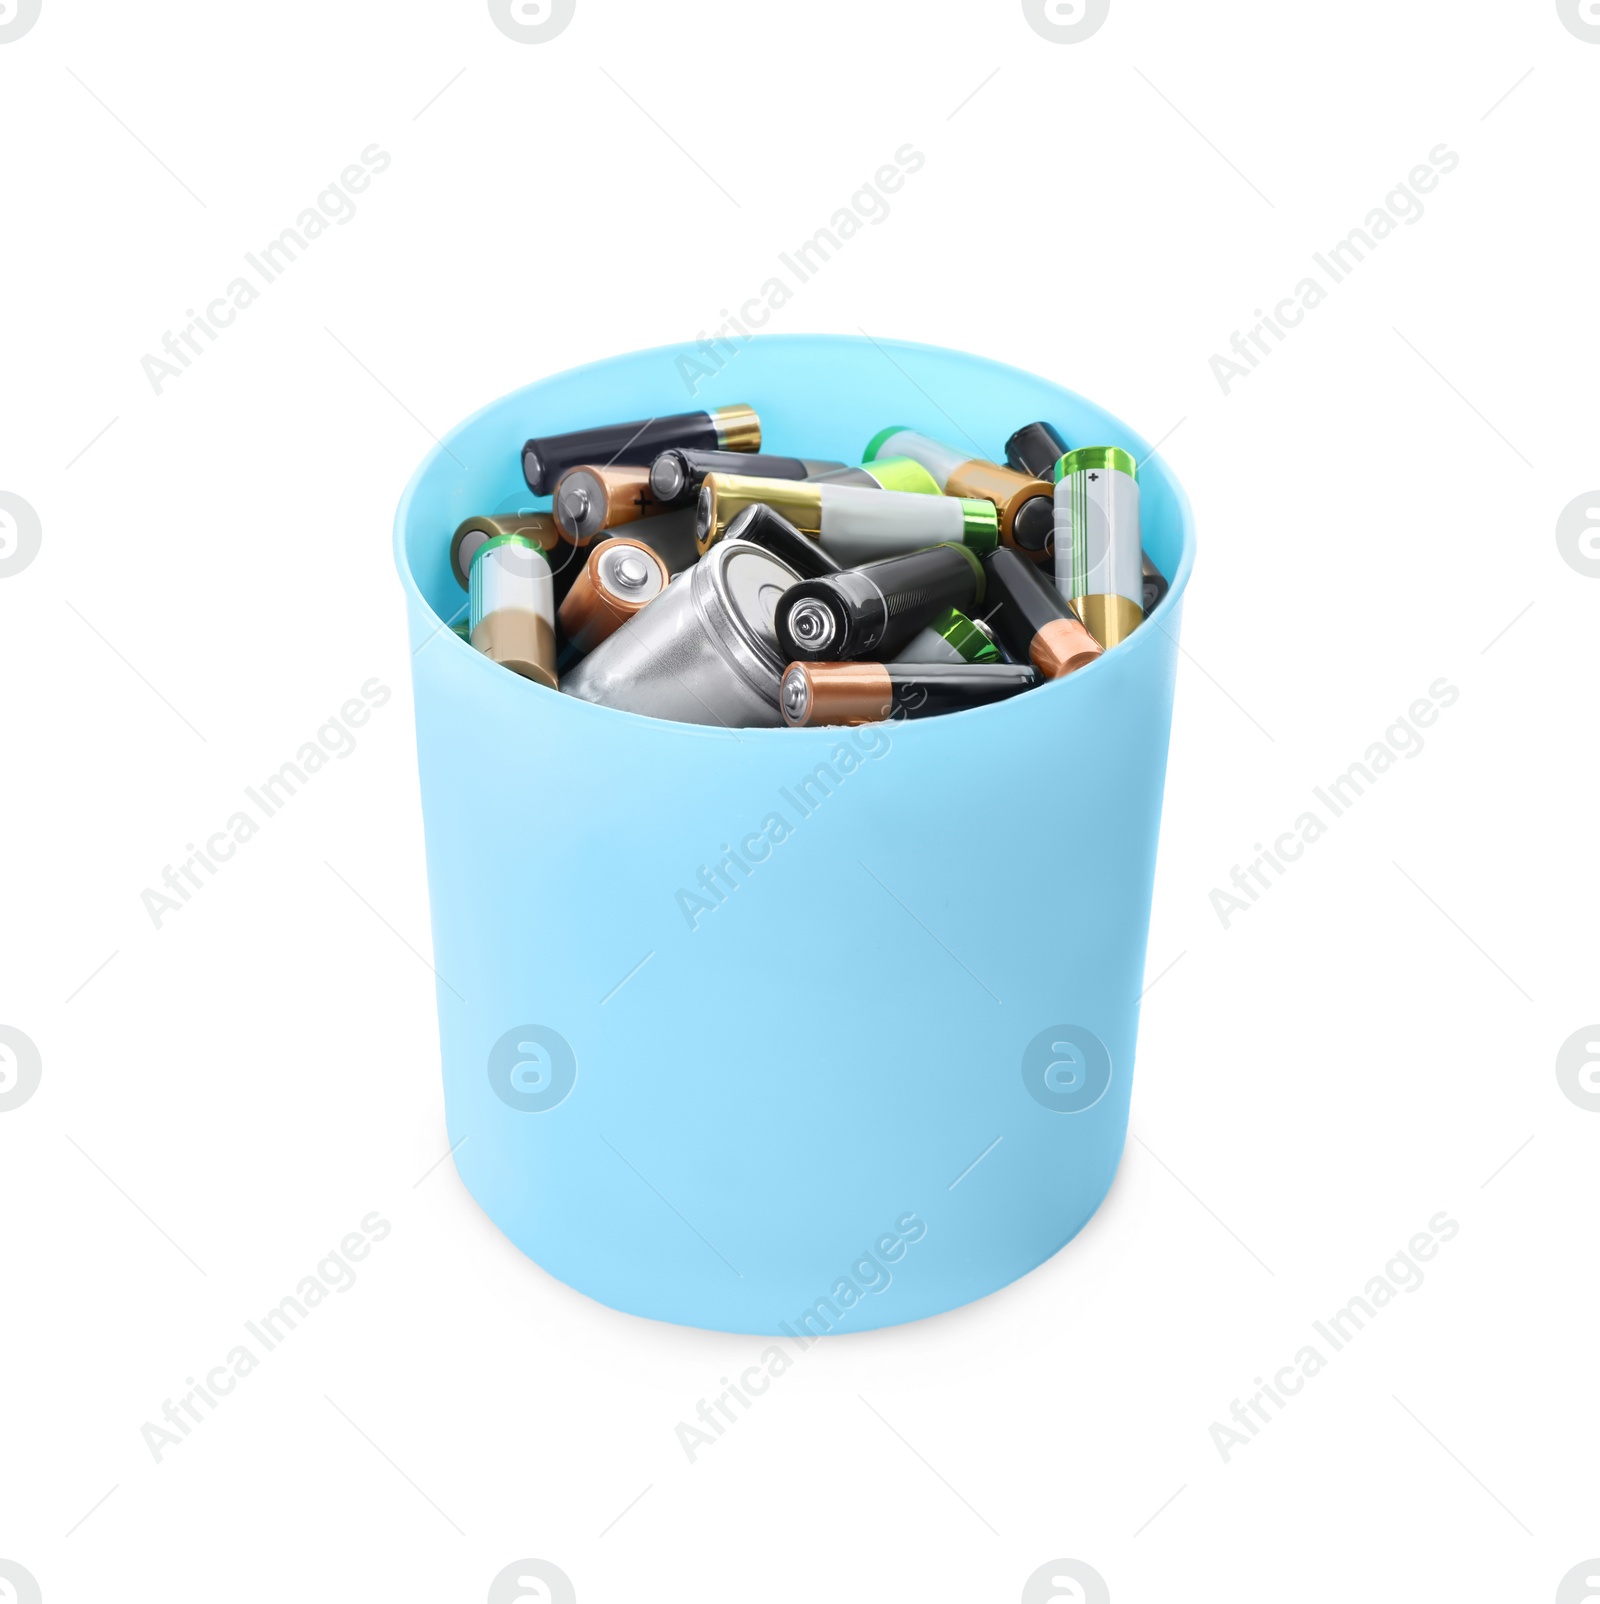 Image of Used batteries in bucket on white background